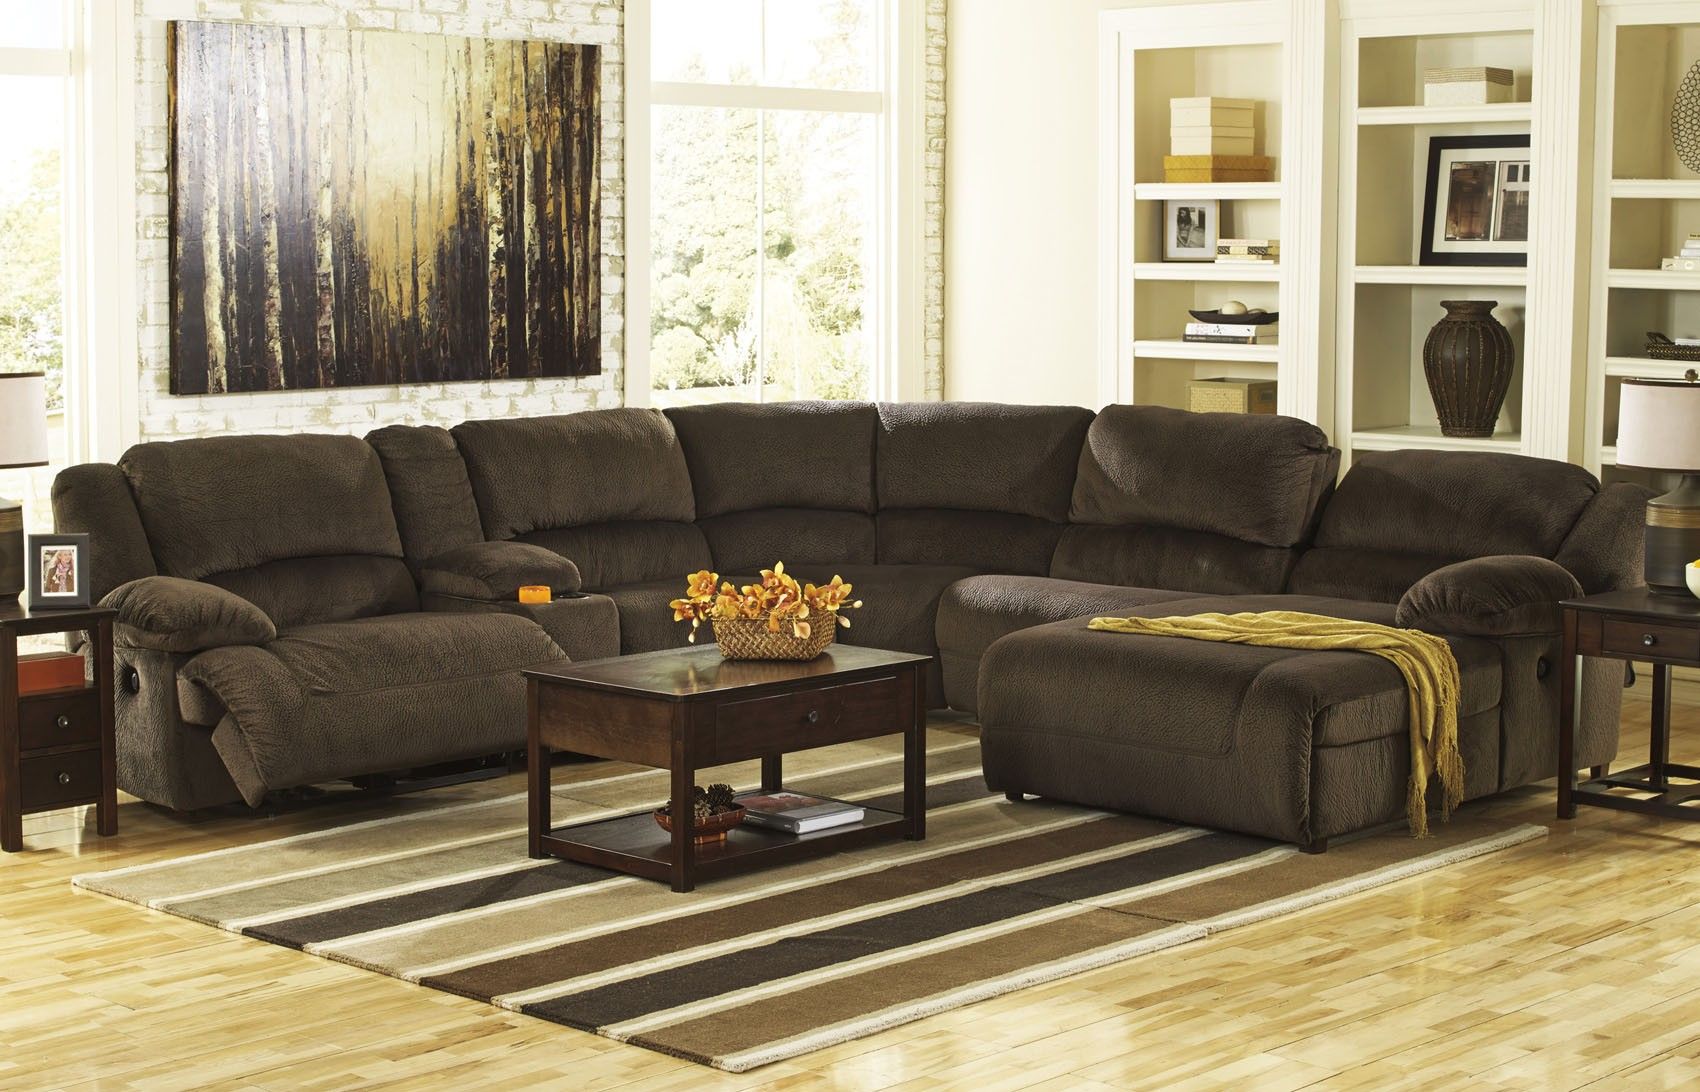 Toletta 6 Pc Power Reclining Sectional